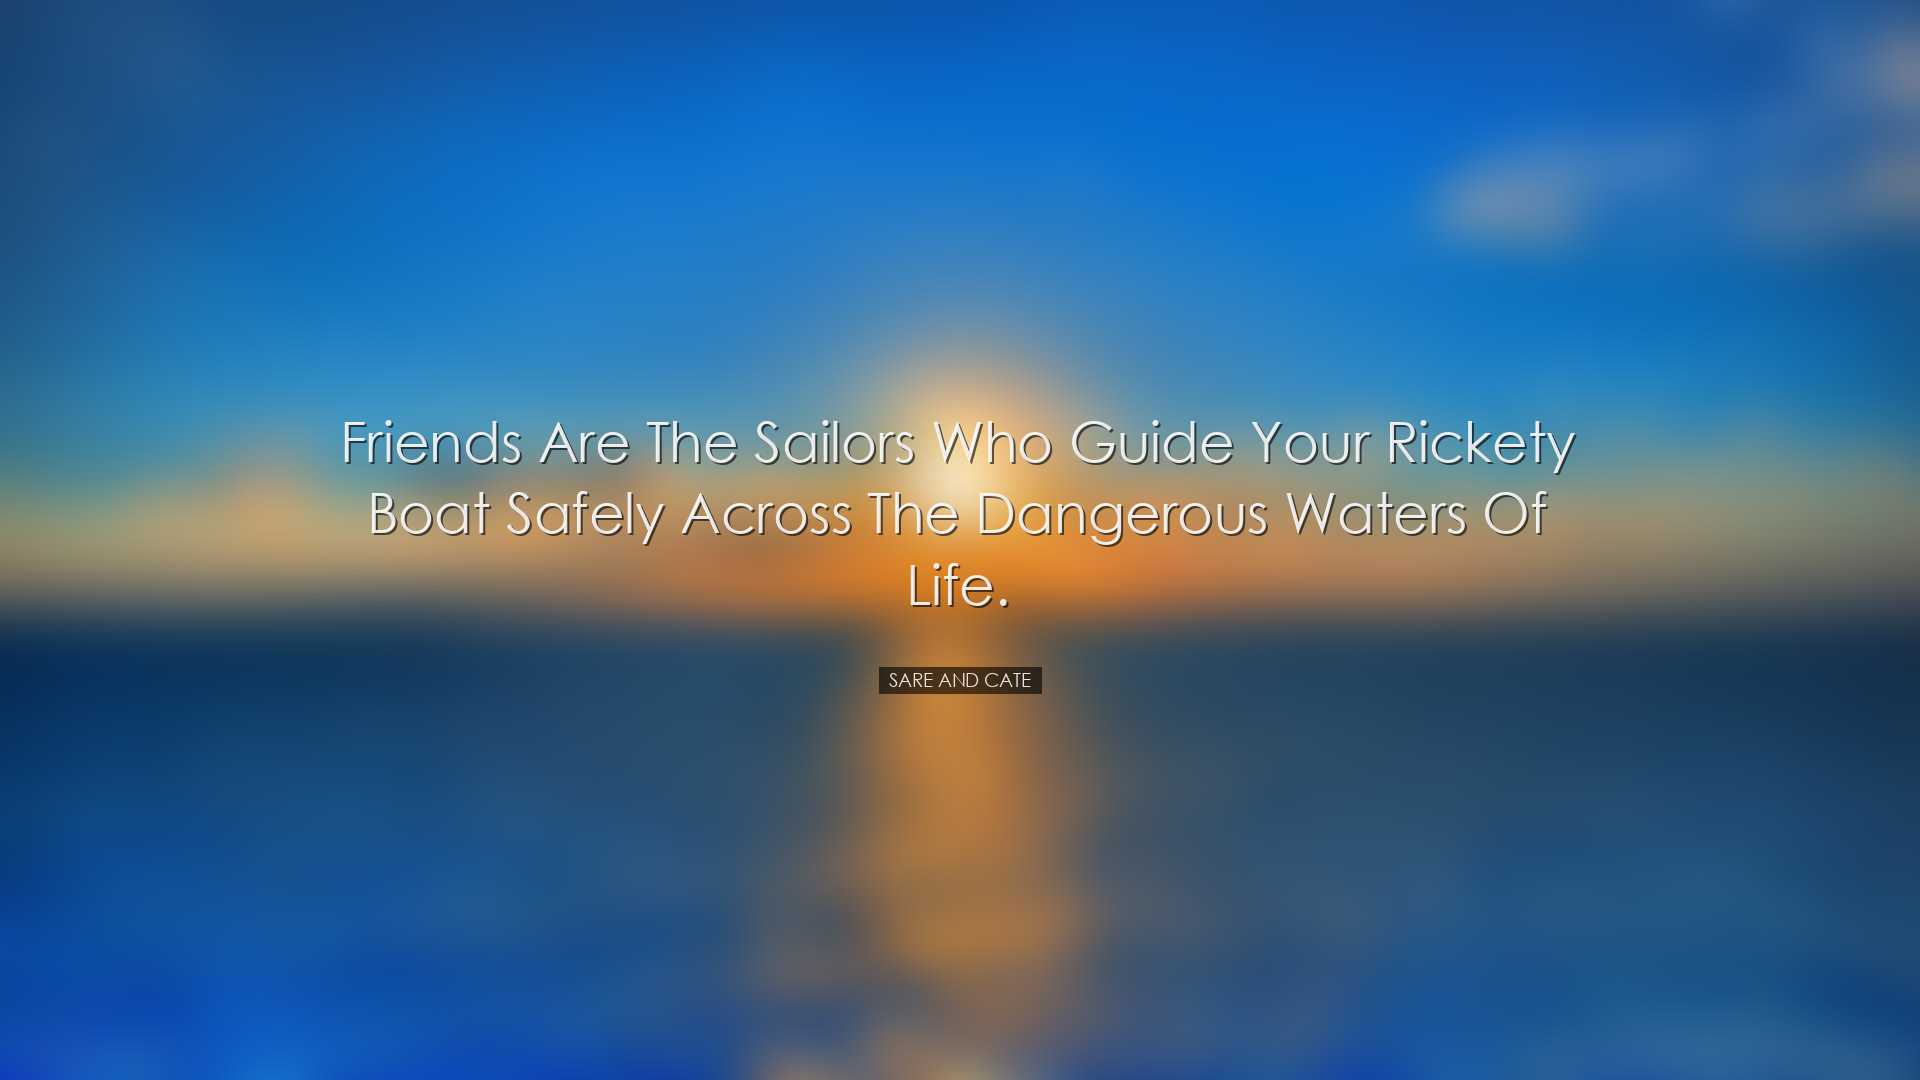 Friends are the sailors who guide your rickety boat safely across